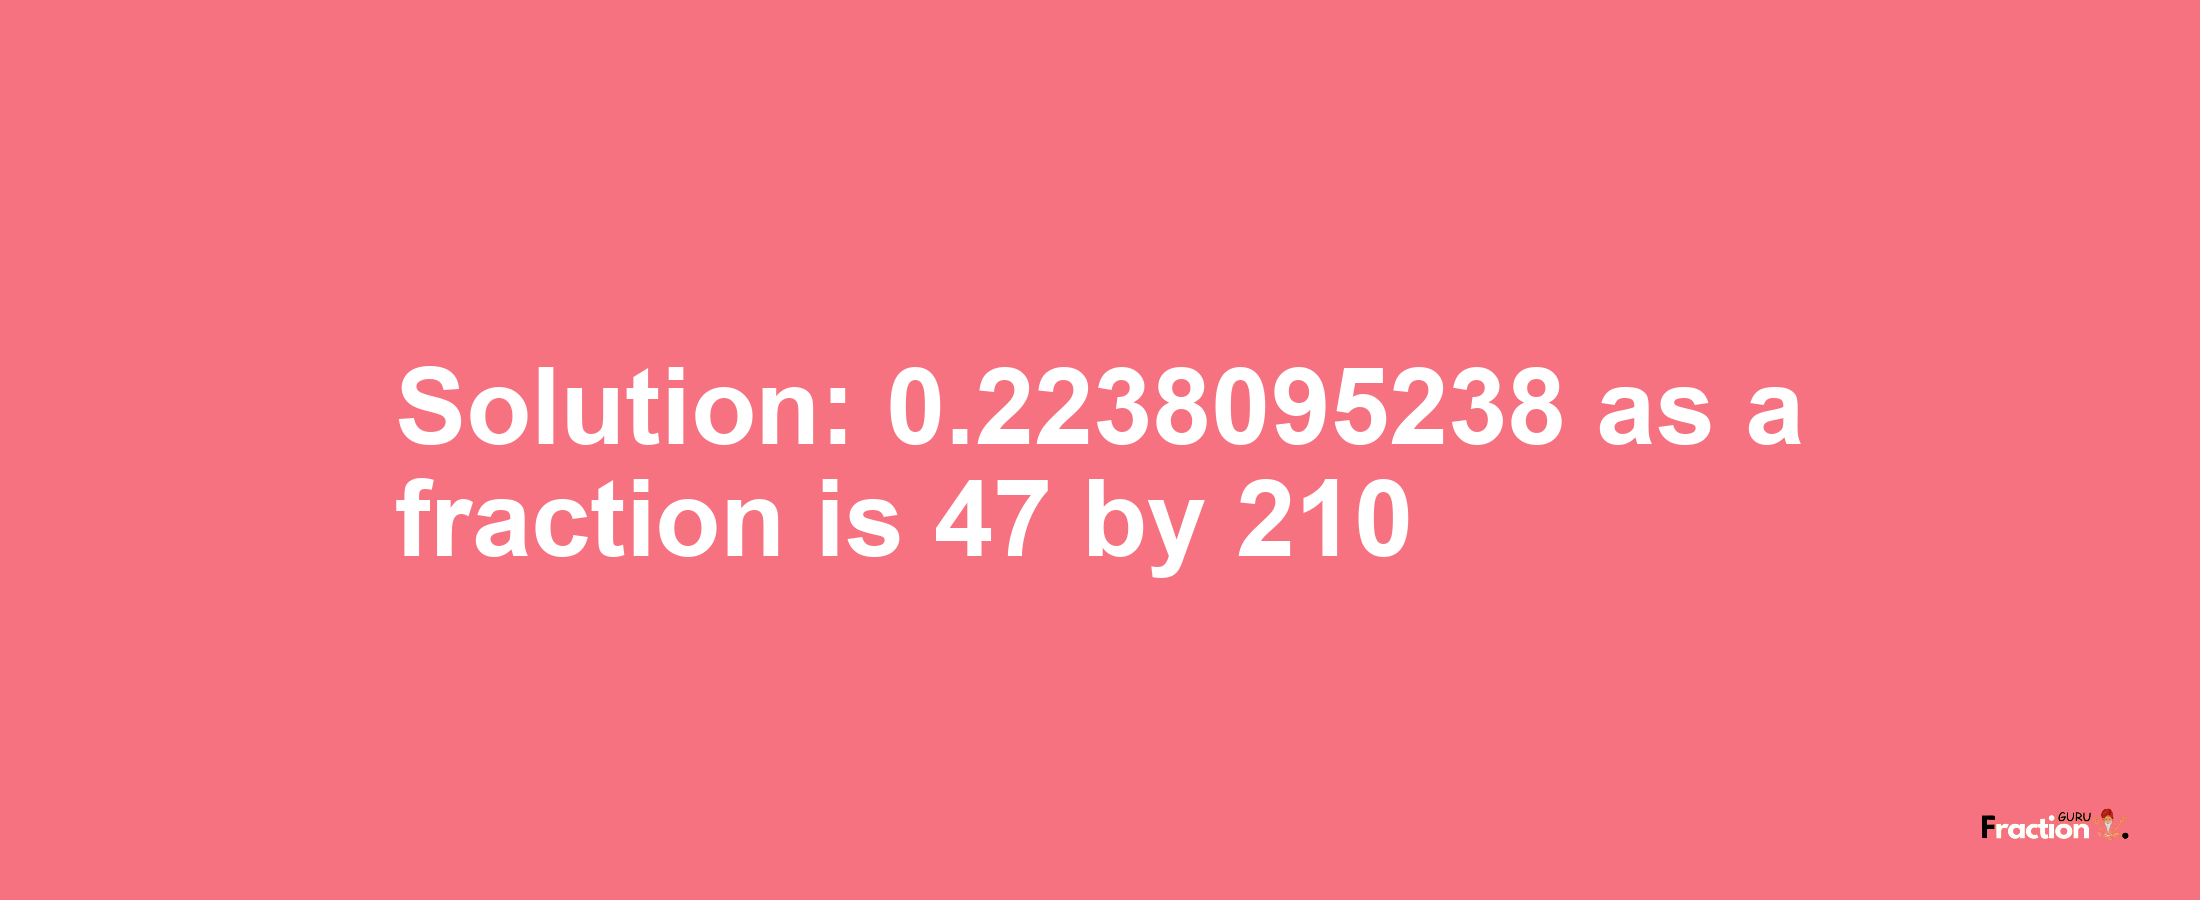 Solution:0.2238095238 as a fraction is 47/210